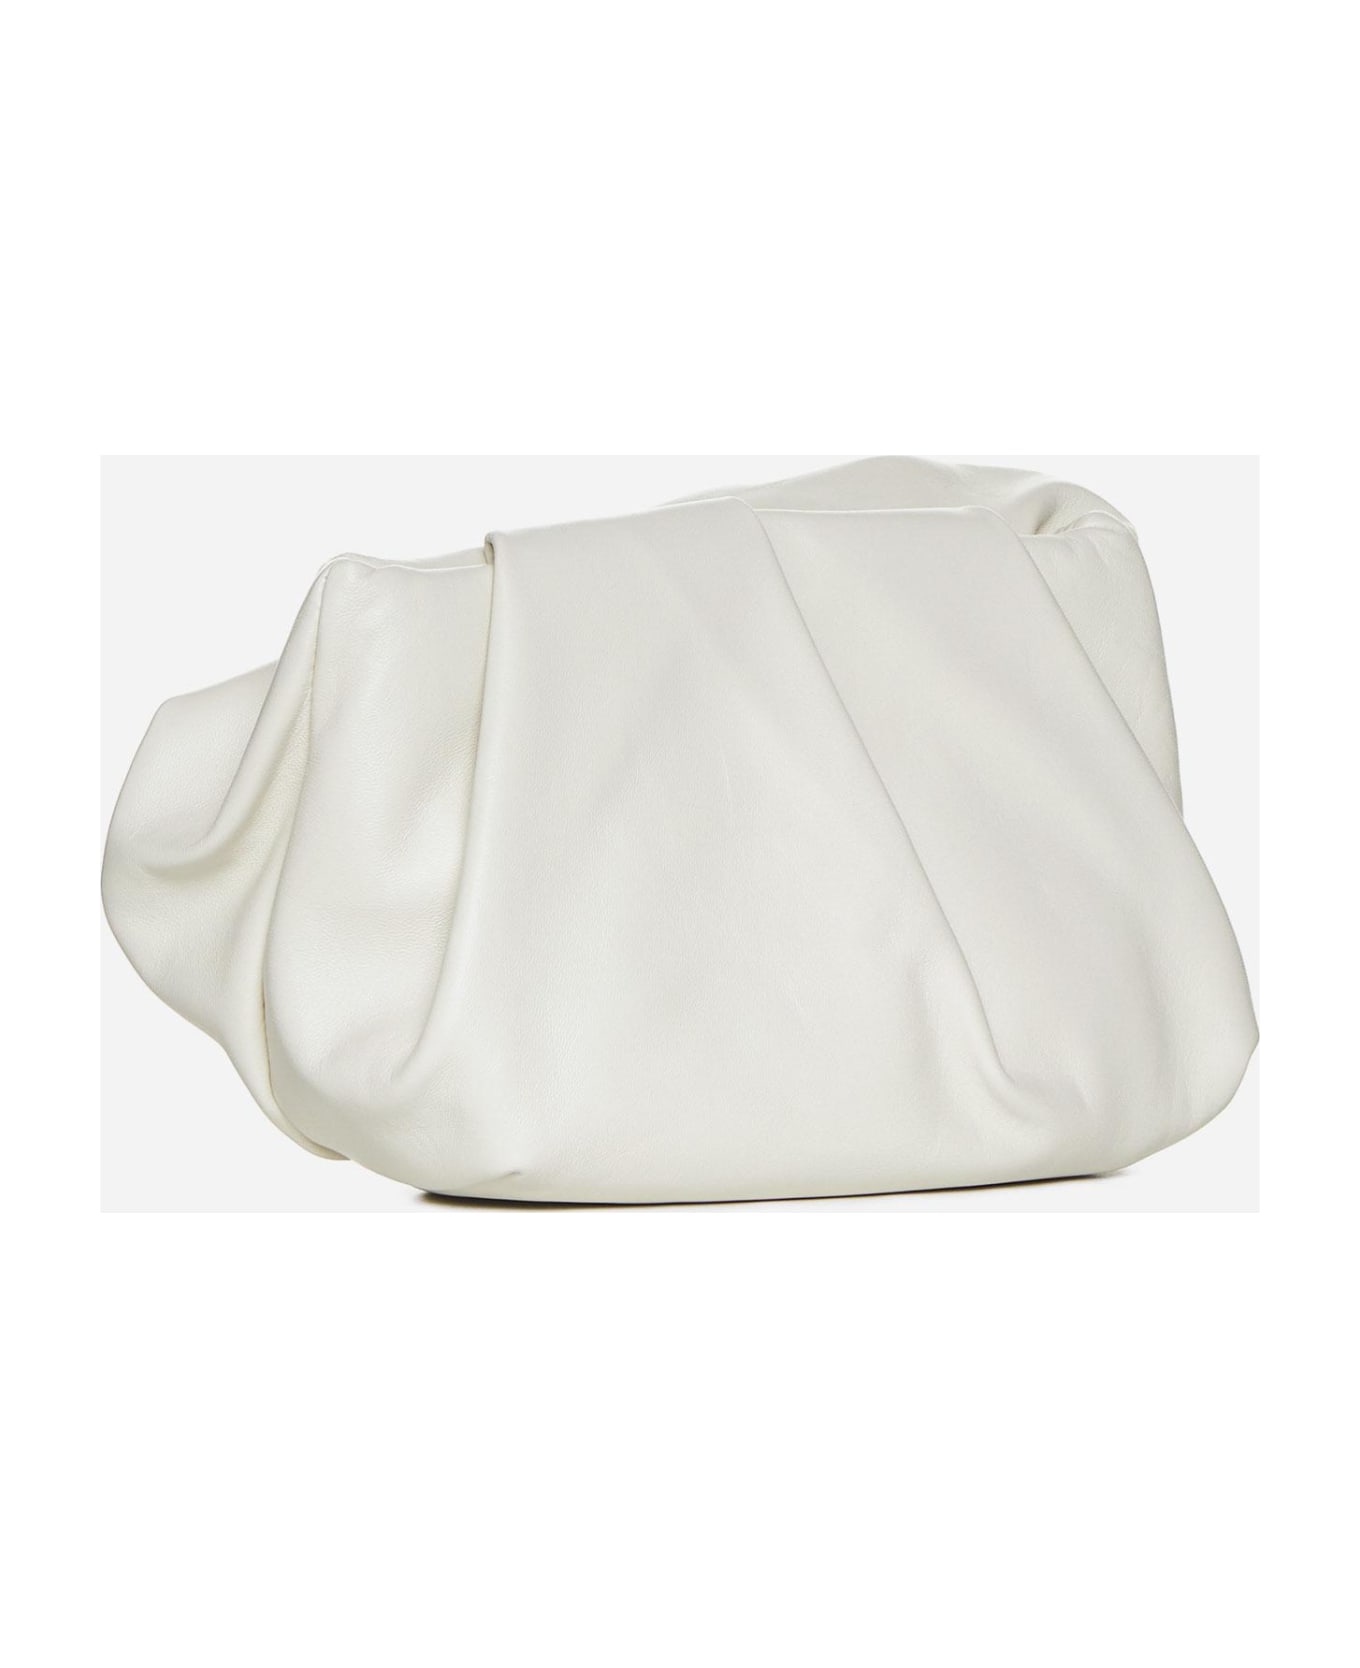 Burberry Rose Nappa Leather Clutch Bag - Ivory